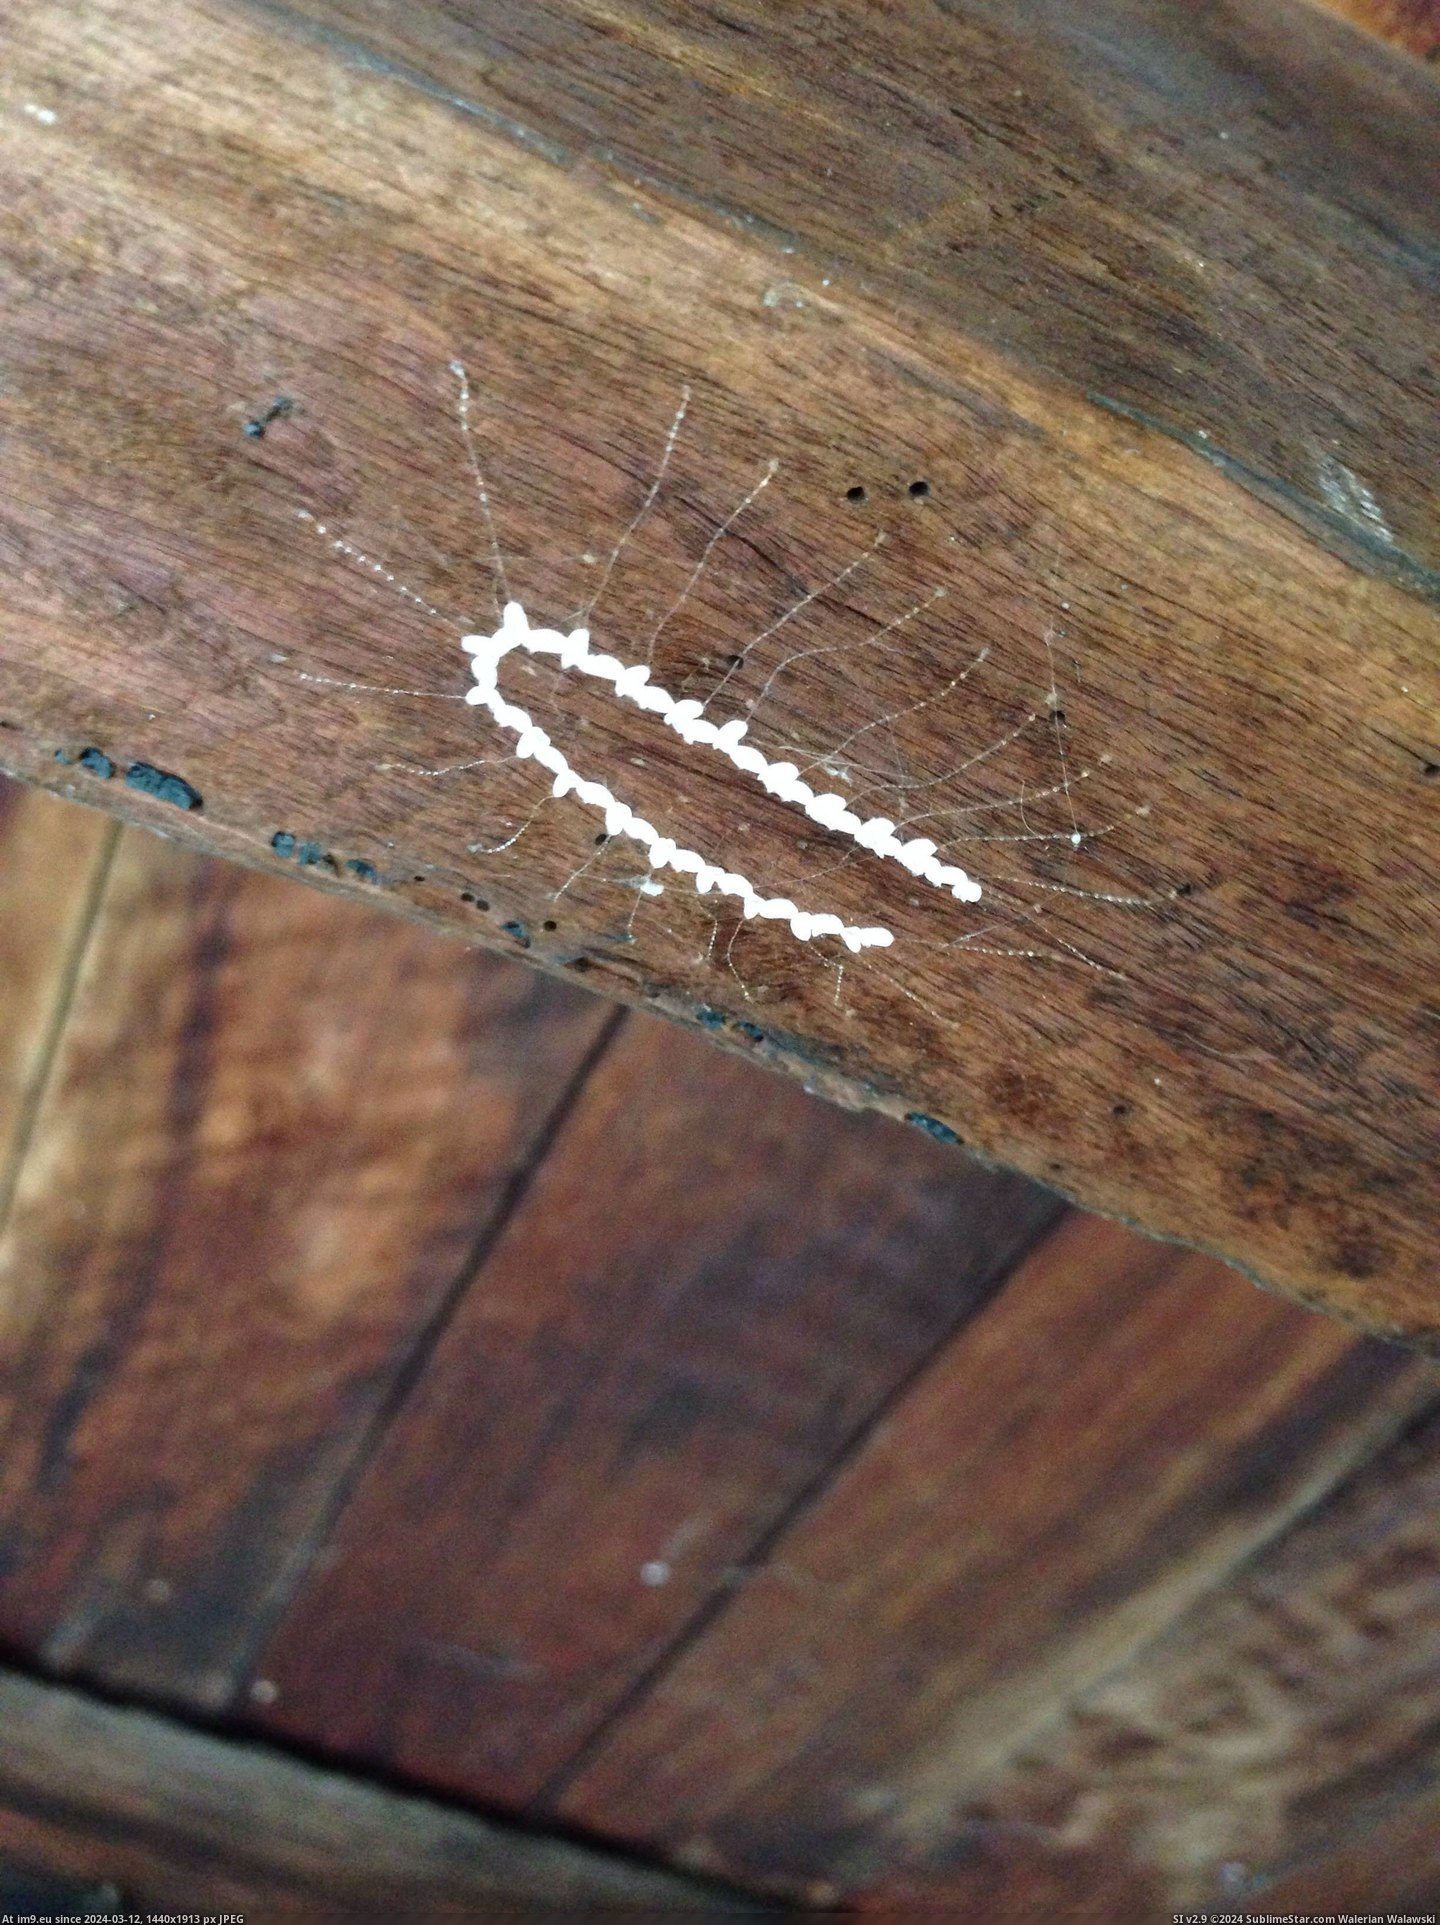 #Wtf #House #Thought #Uncles #Rafters #Australia #Hanging #Considered [Mildlyinteresting] Found this hanging from the rafters under my uncles house in Australia. Considered WTF- thought twice... Pic. (Изображение из альбом My r/MILDLYINTERESTING favs))